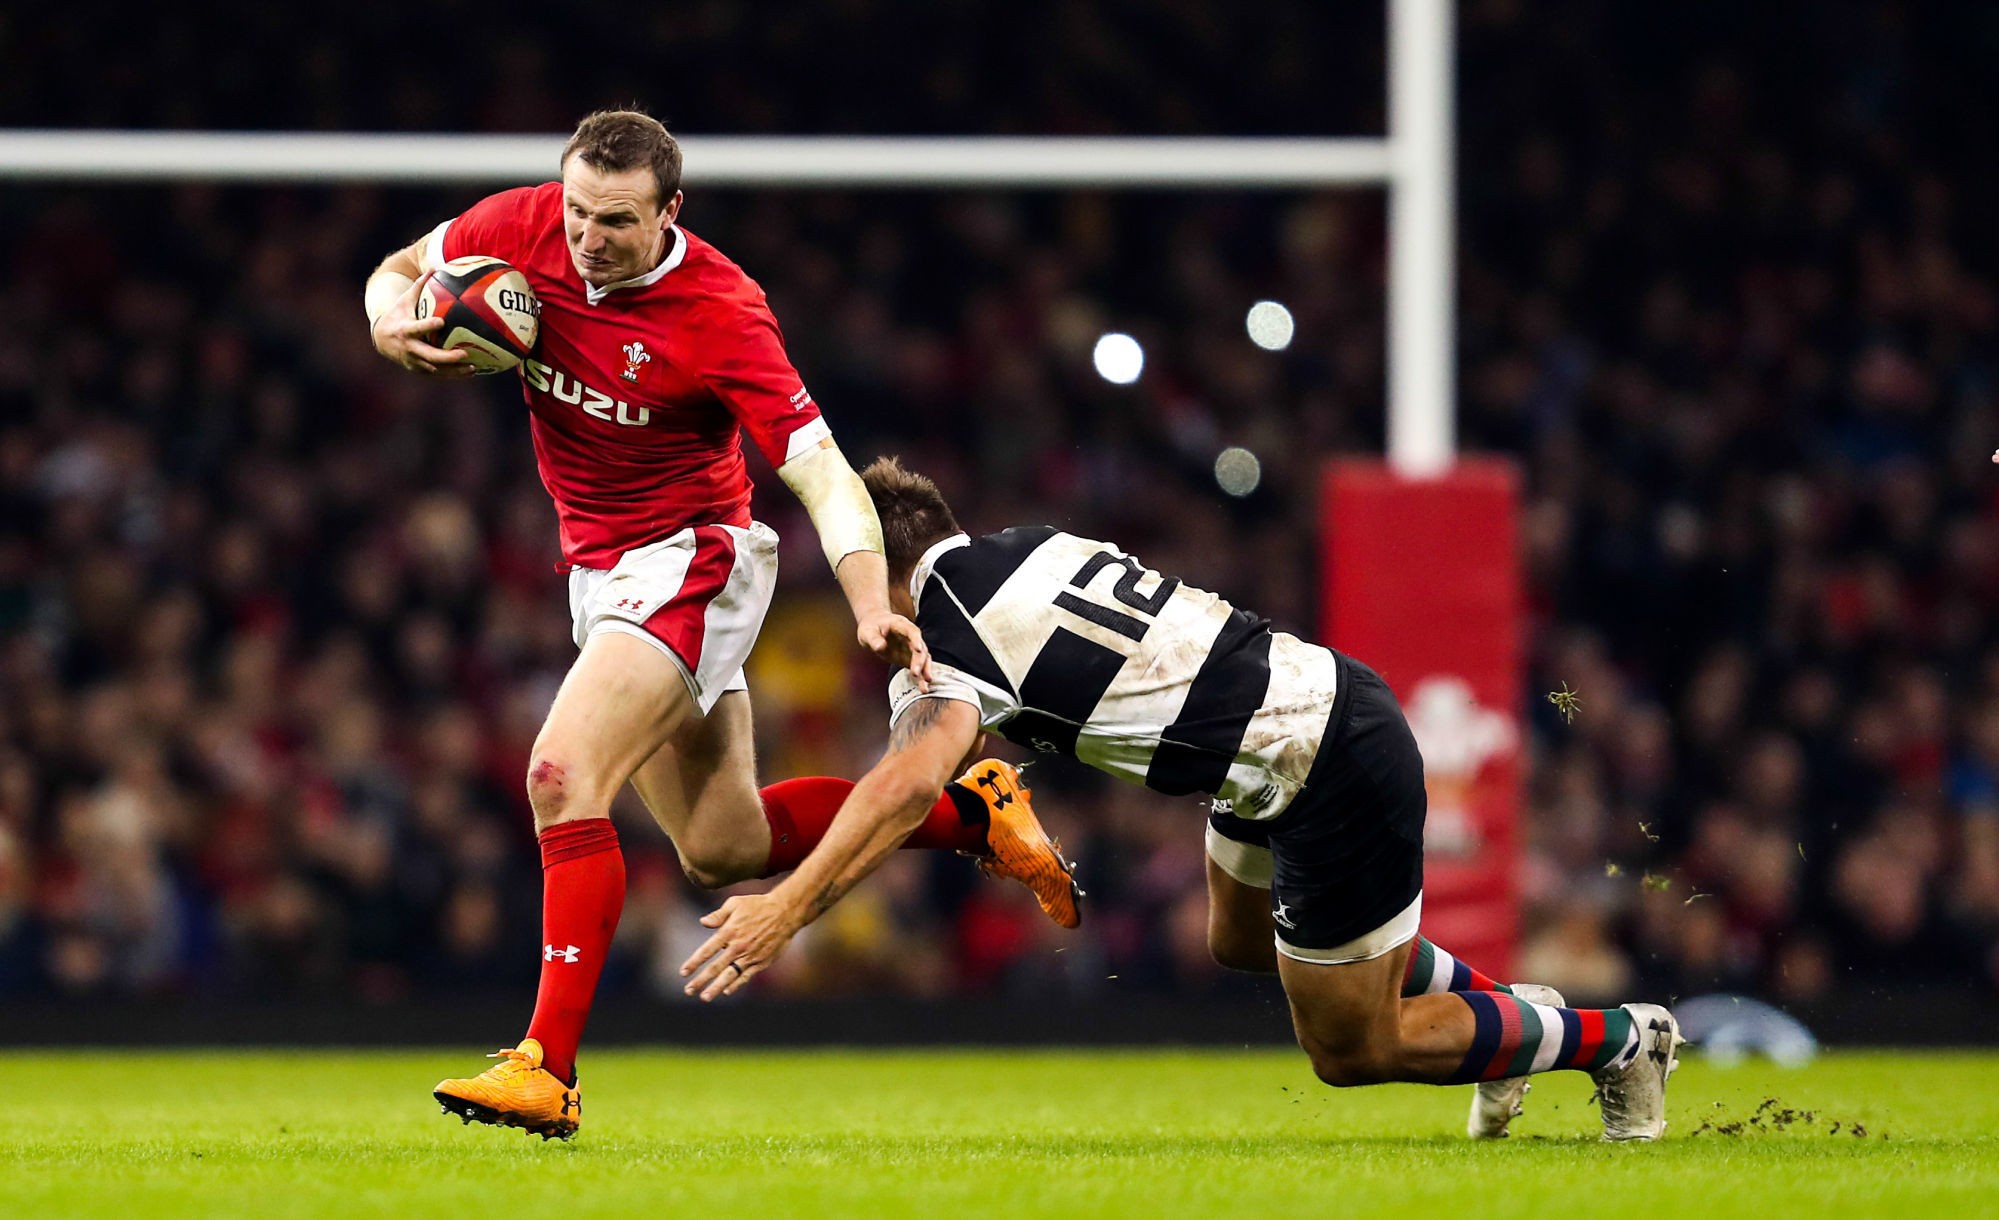 Wales Hadleigh Parkes in action during the International match at the Principality Stadium, Cardiff. 

Photo by Icon Sport - Hadleigh PARKES - Cardiff City Stadium - Cardiff (Pays de Galles)